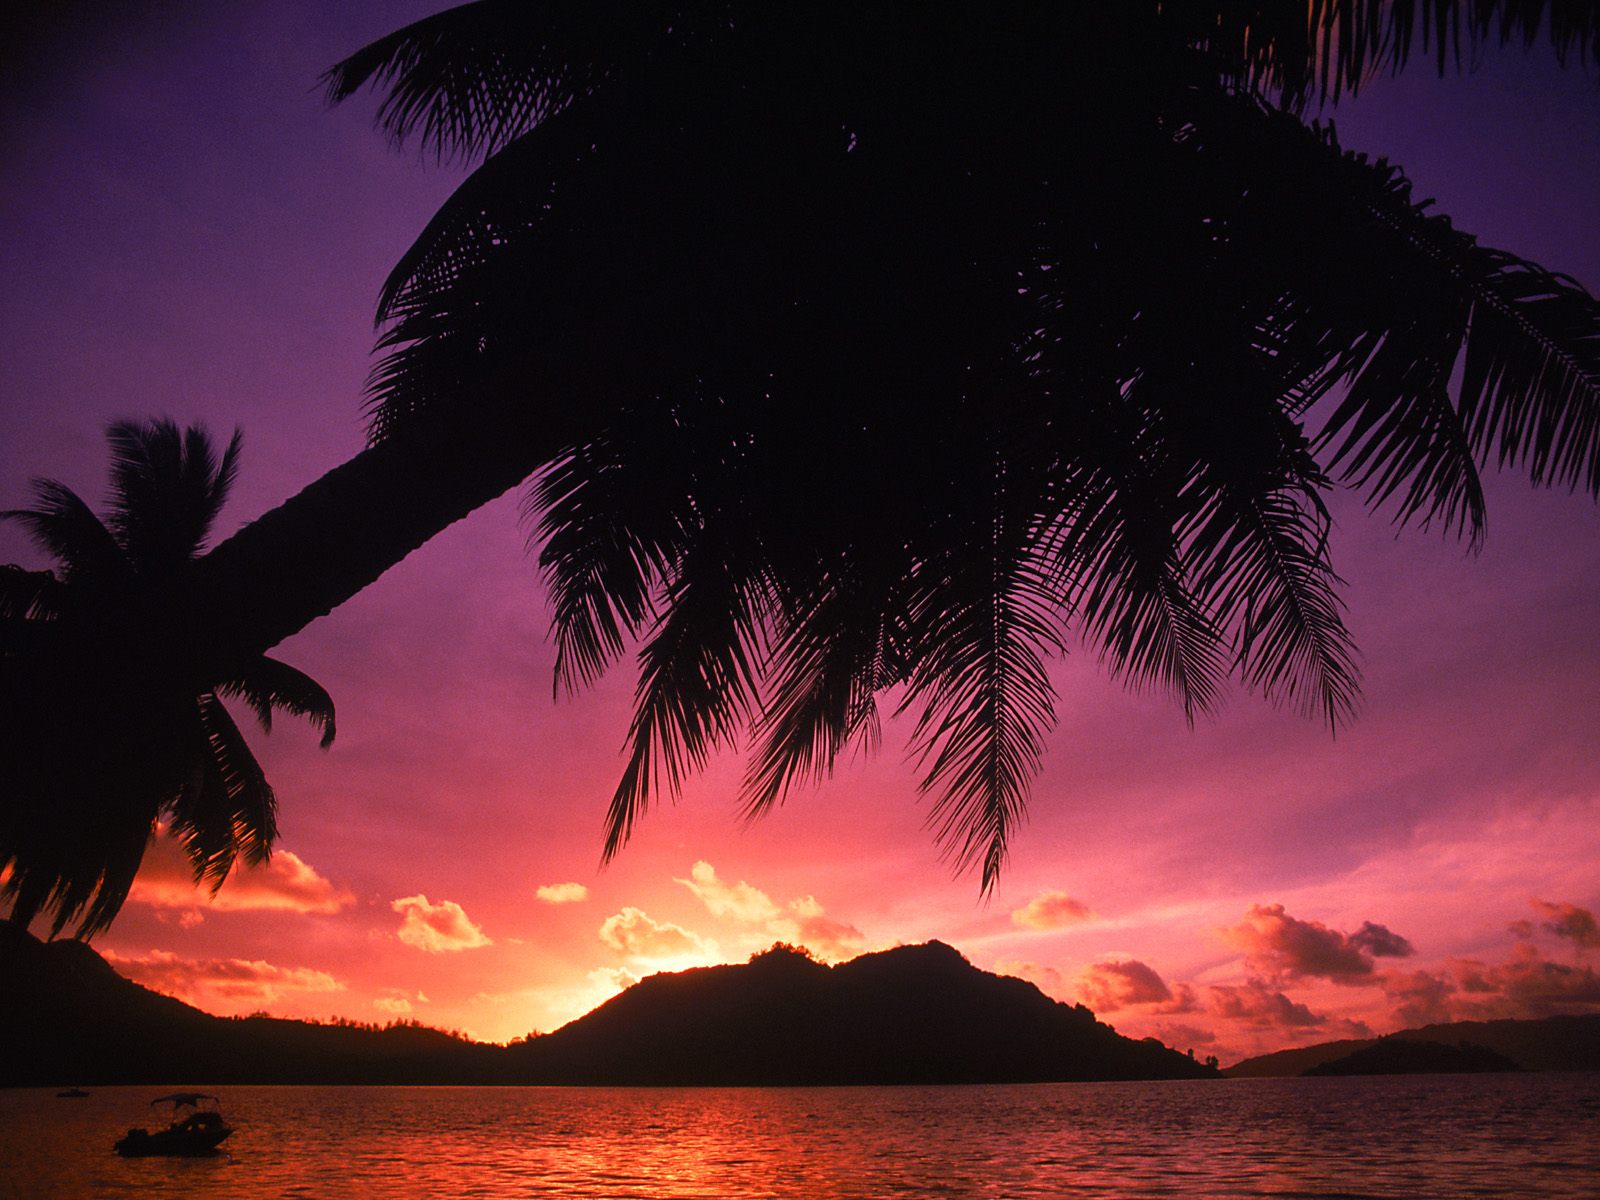 Tropical Beach at Sunset The Seychelles picture  Tropical Beach at